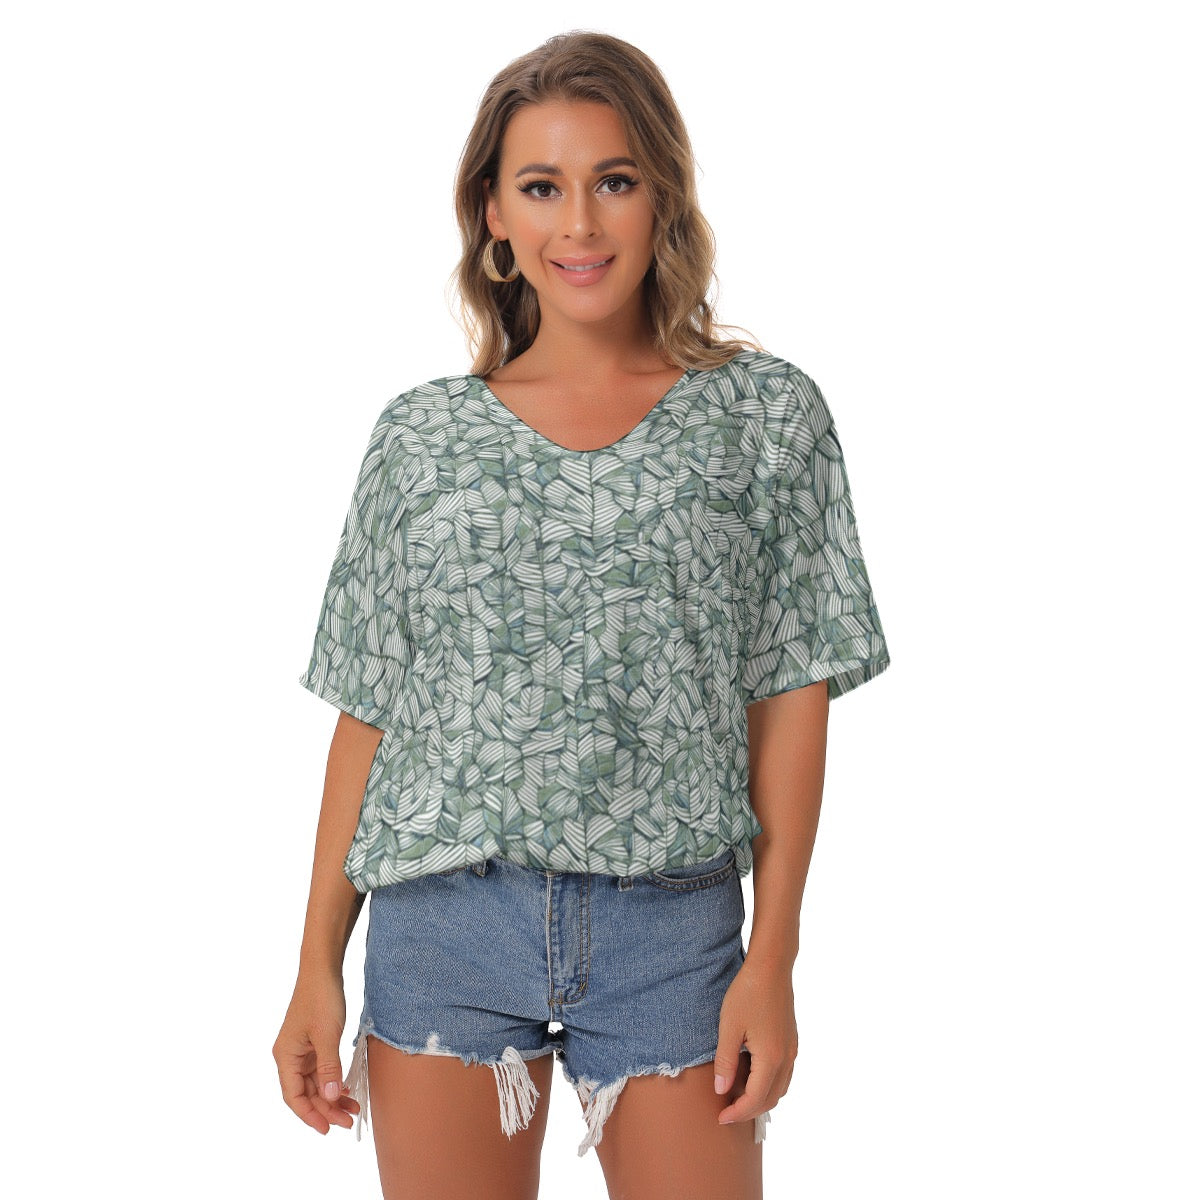 Water Lily -- Women's Bat Sleeves V-Neck Blouse